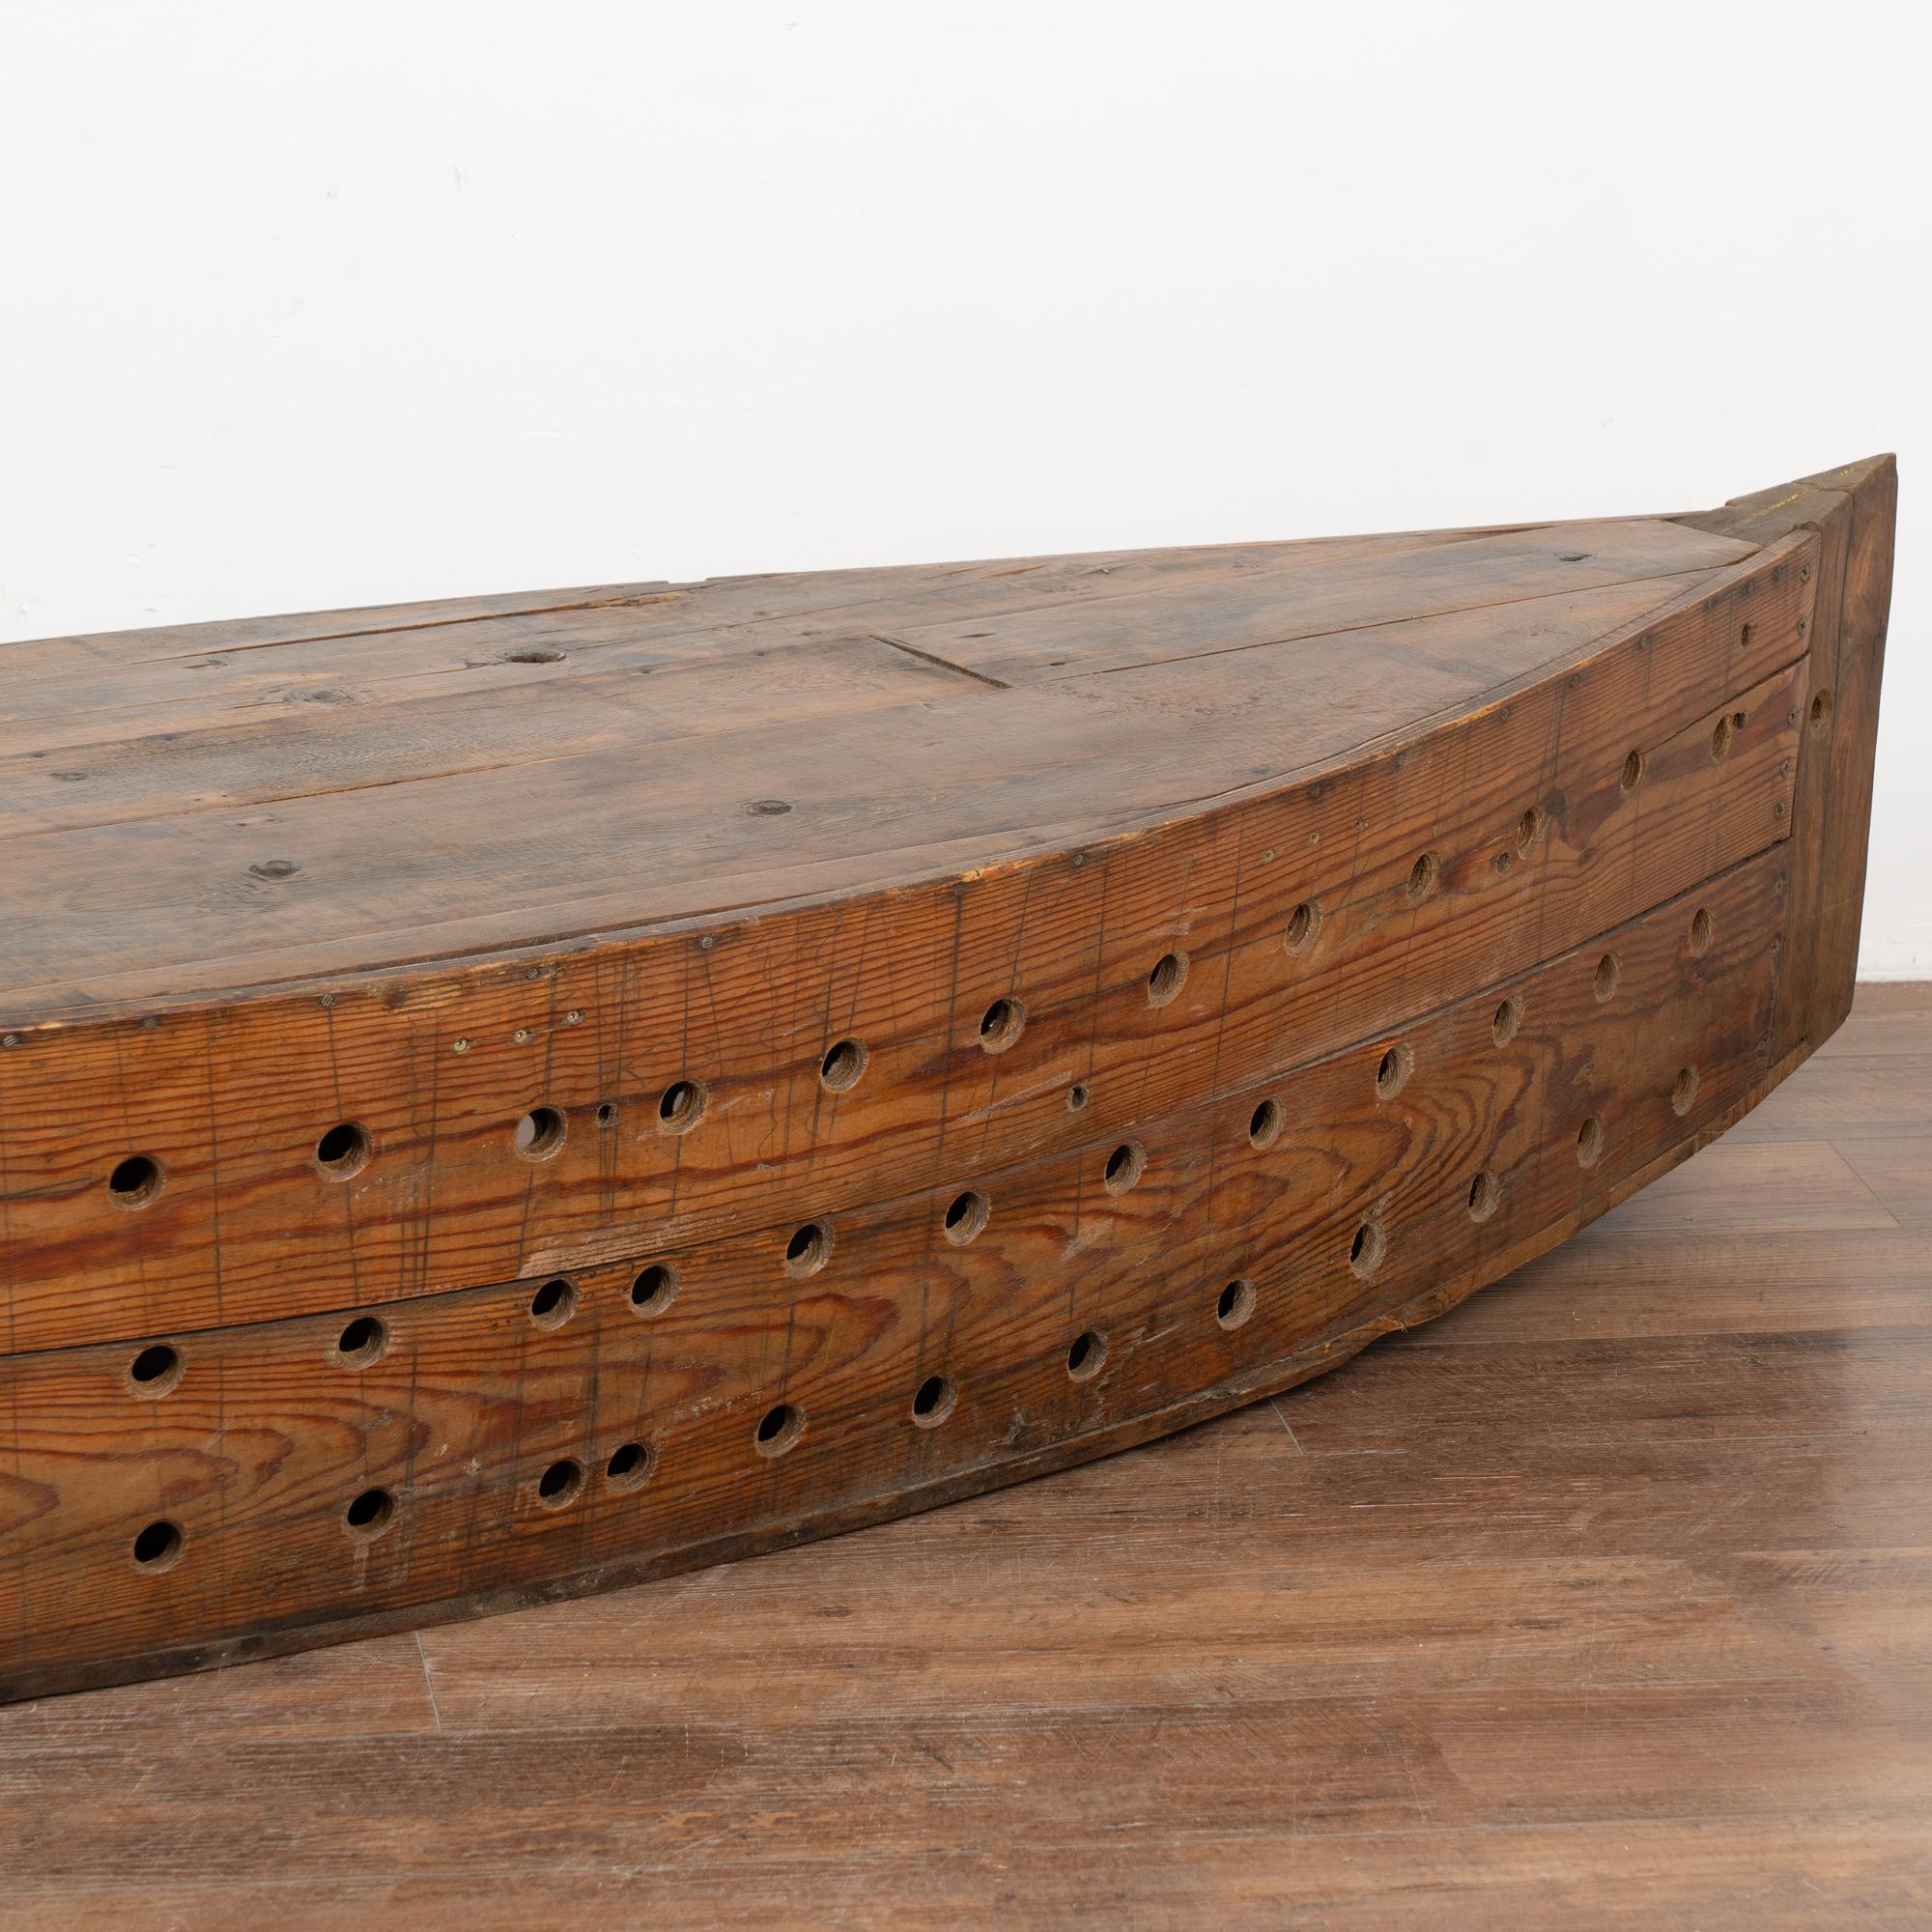 Rustic Decorative Model Boat With Holes For Fishing or Large Creel, circa 1940 For Sale 3